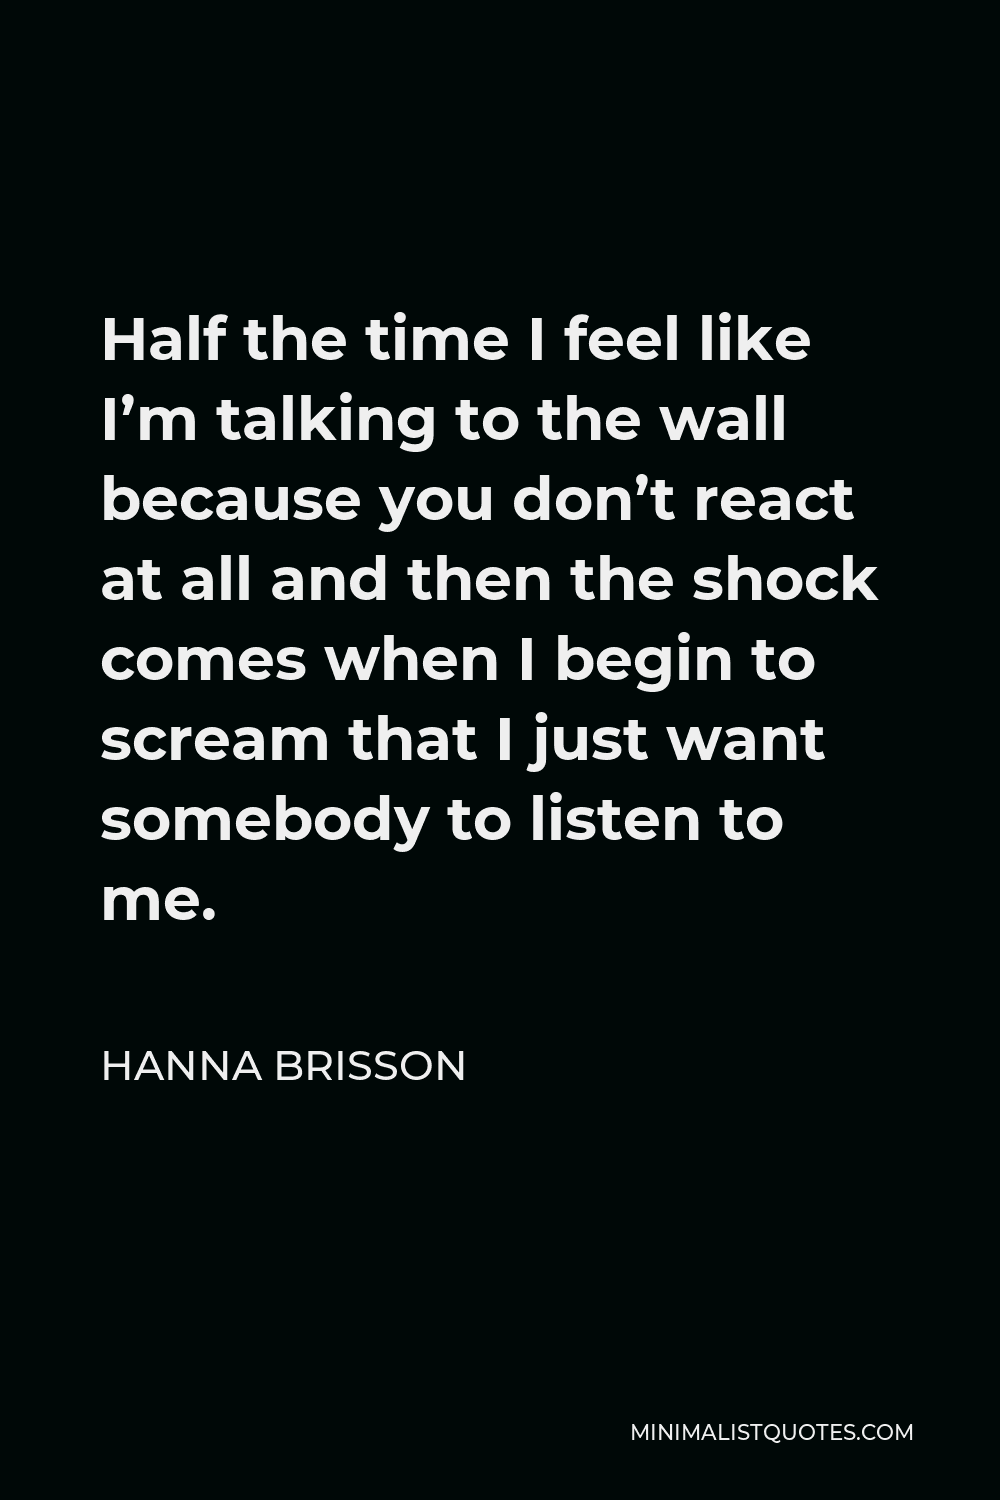 Hanna Brisson Quote - Half the time I feel like I’m talking to the wall because you don’t react at all and then the shock comes when I begin to scream that I just want somebody to listen to me.